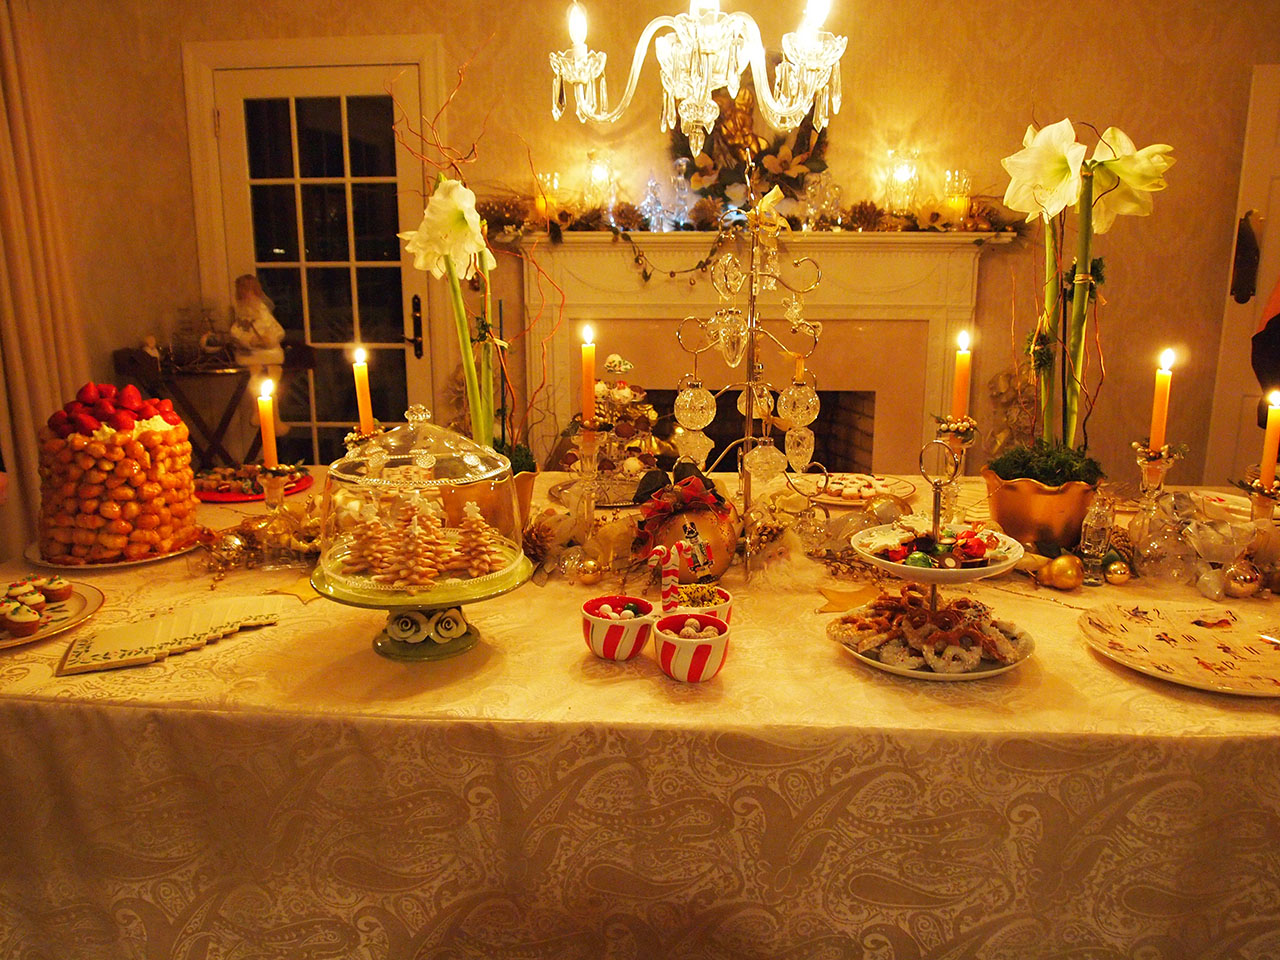 Holiday Catering